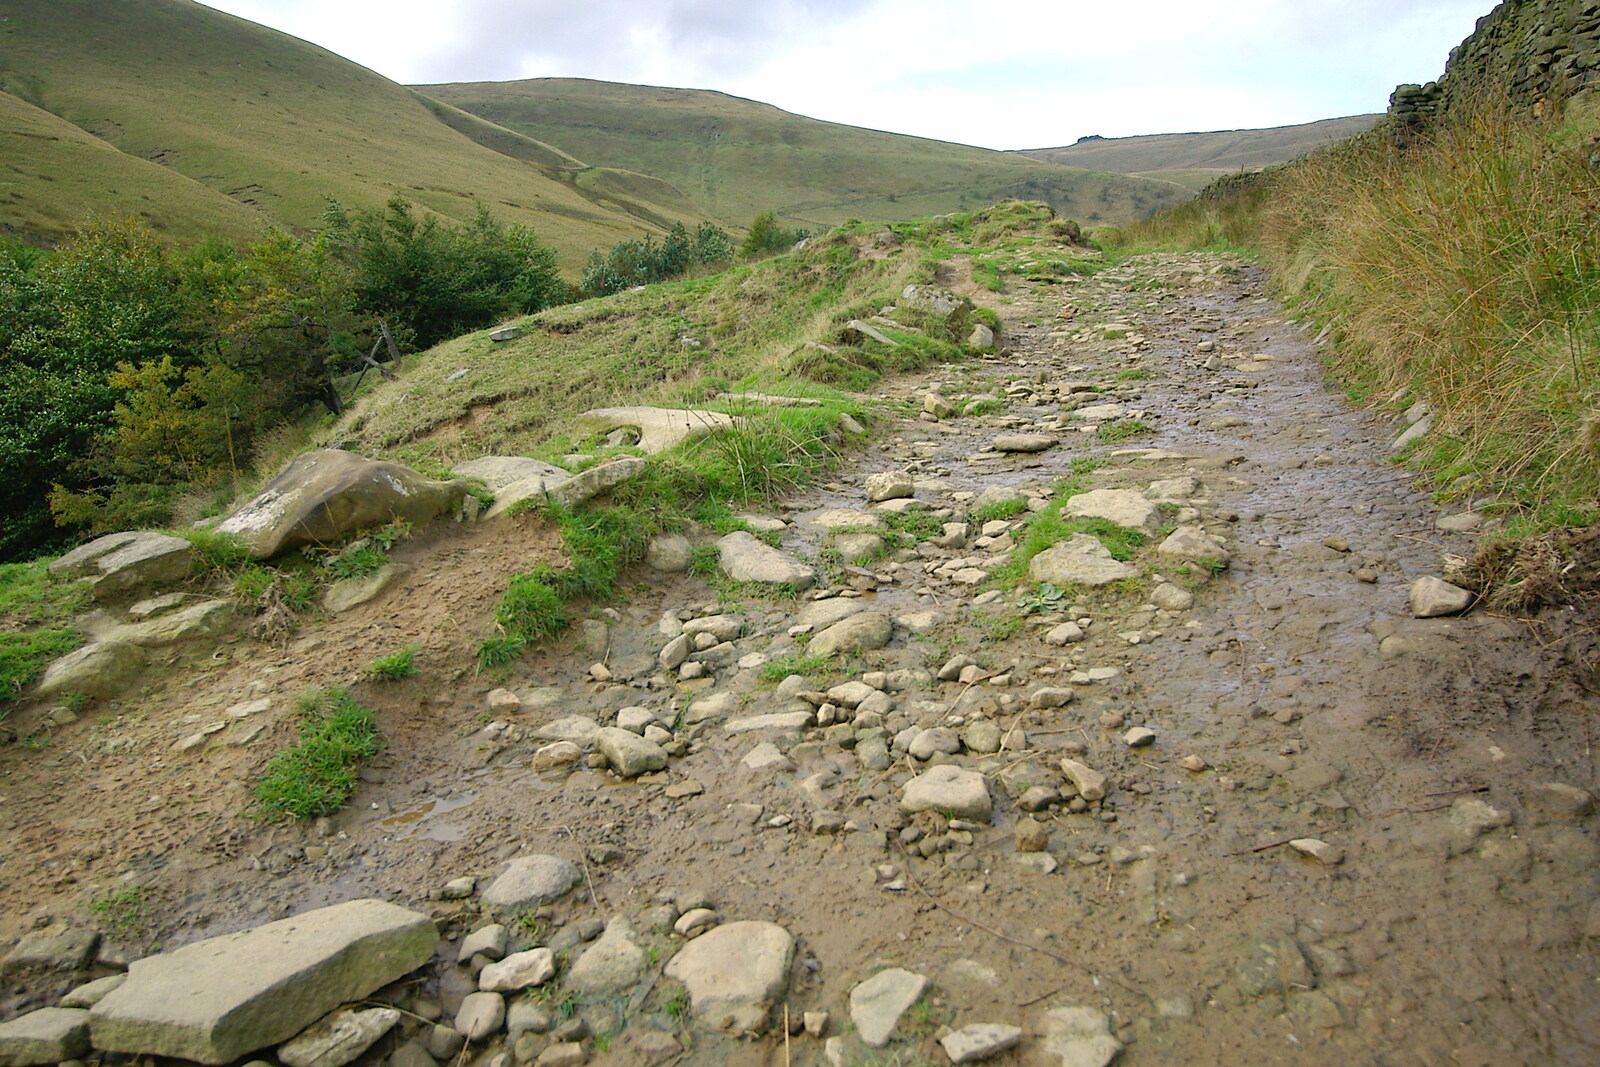 A rough path from The Pennine Way: Lost on Kinder Scout, Derbyshire - 9th October 2005